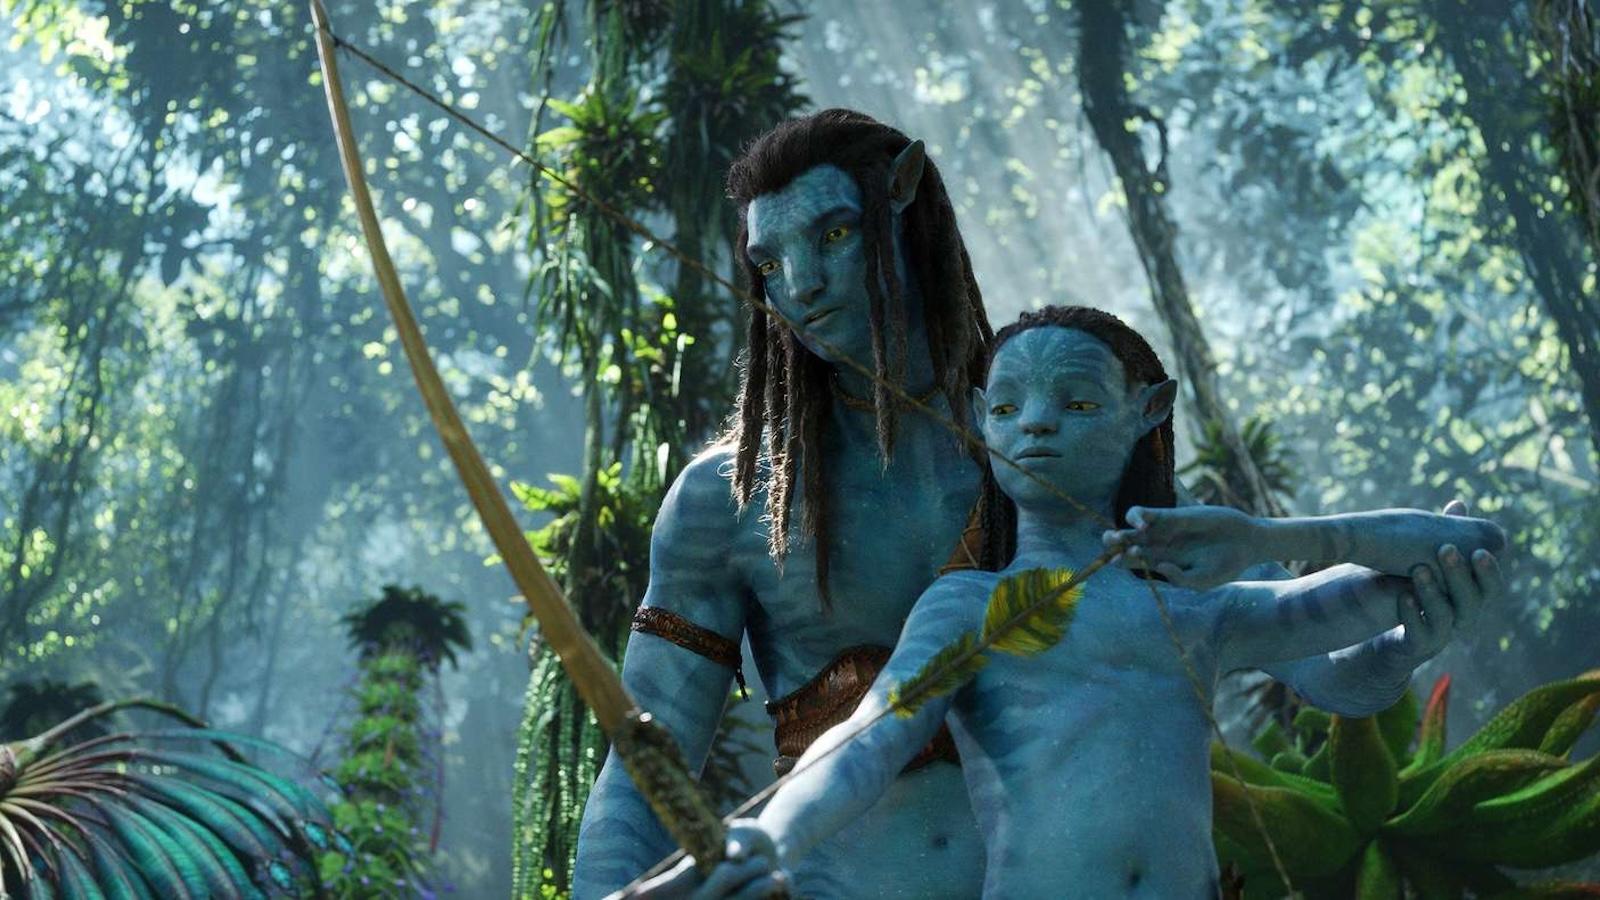 Still from Avatar 2, The Way of Water